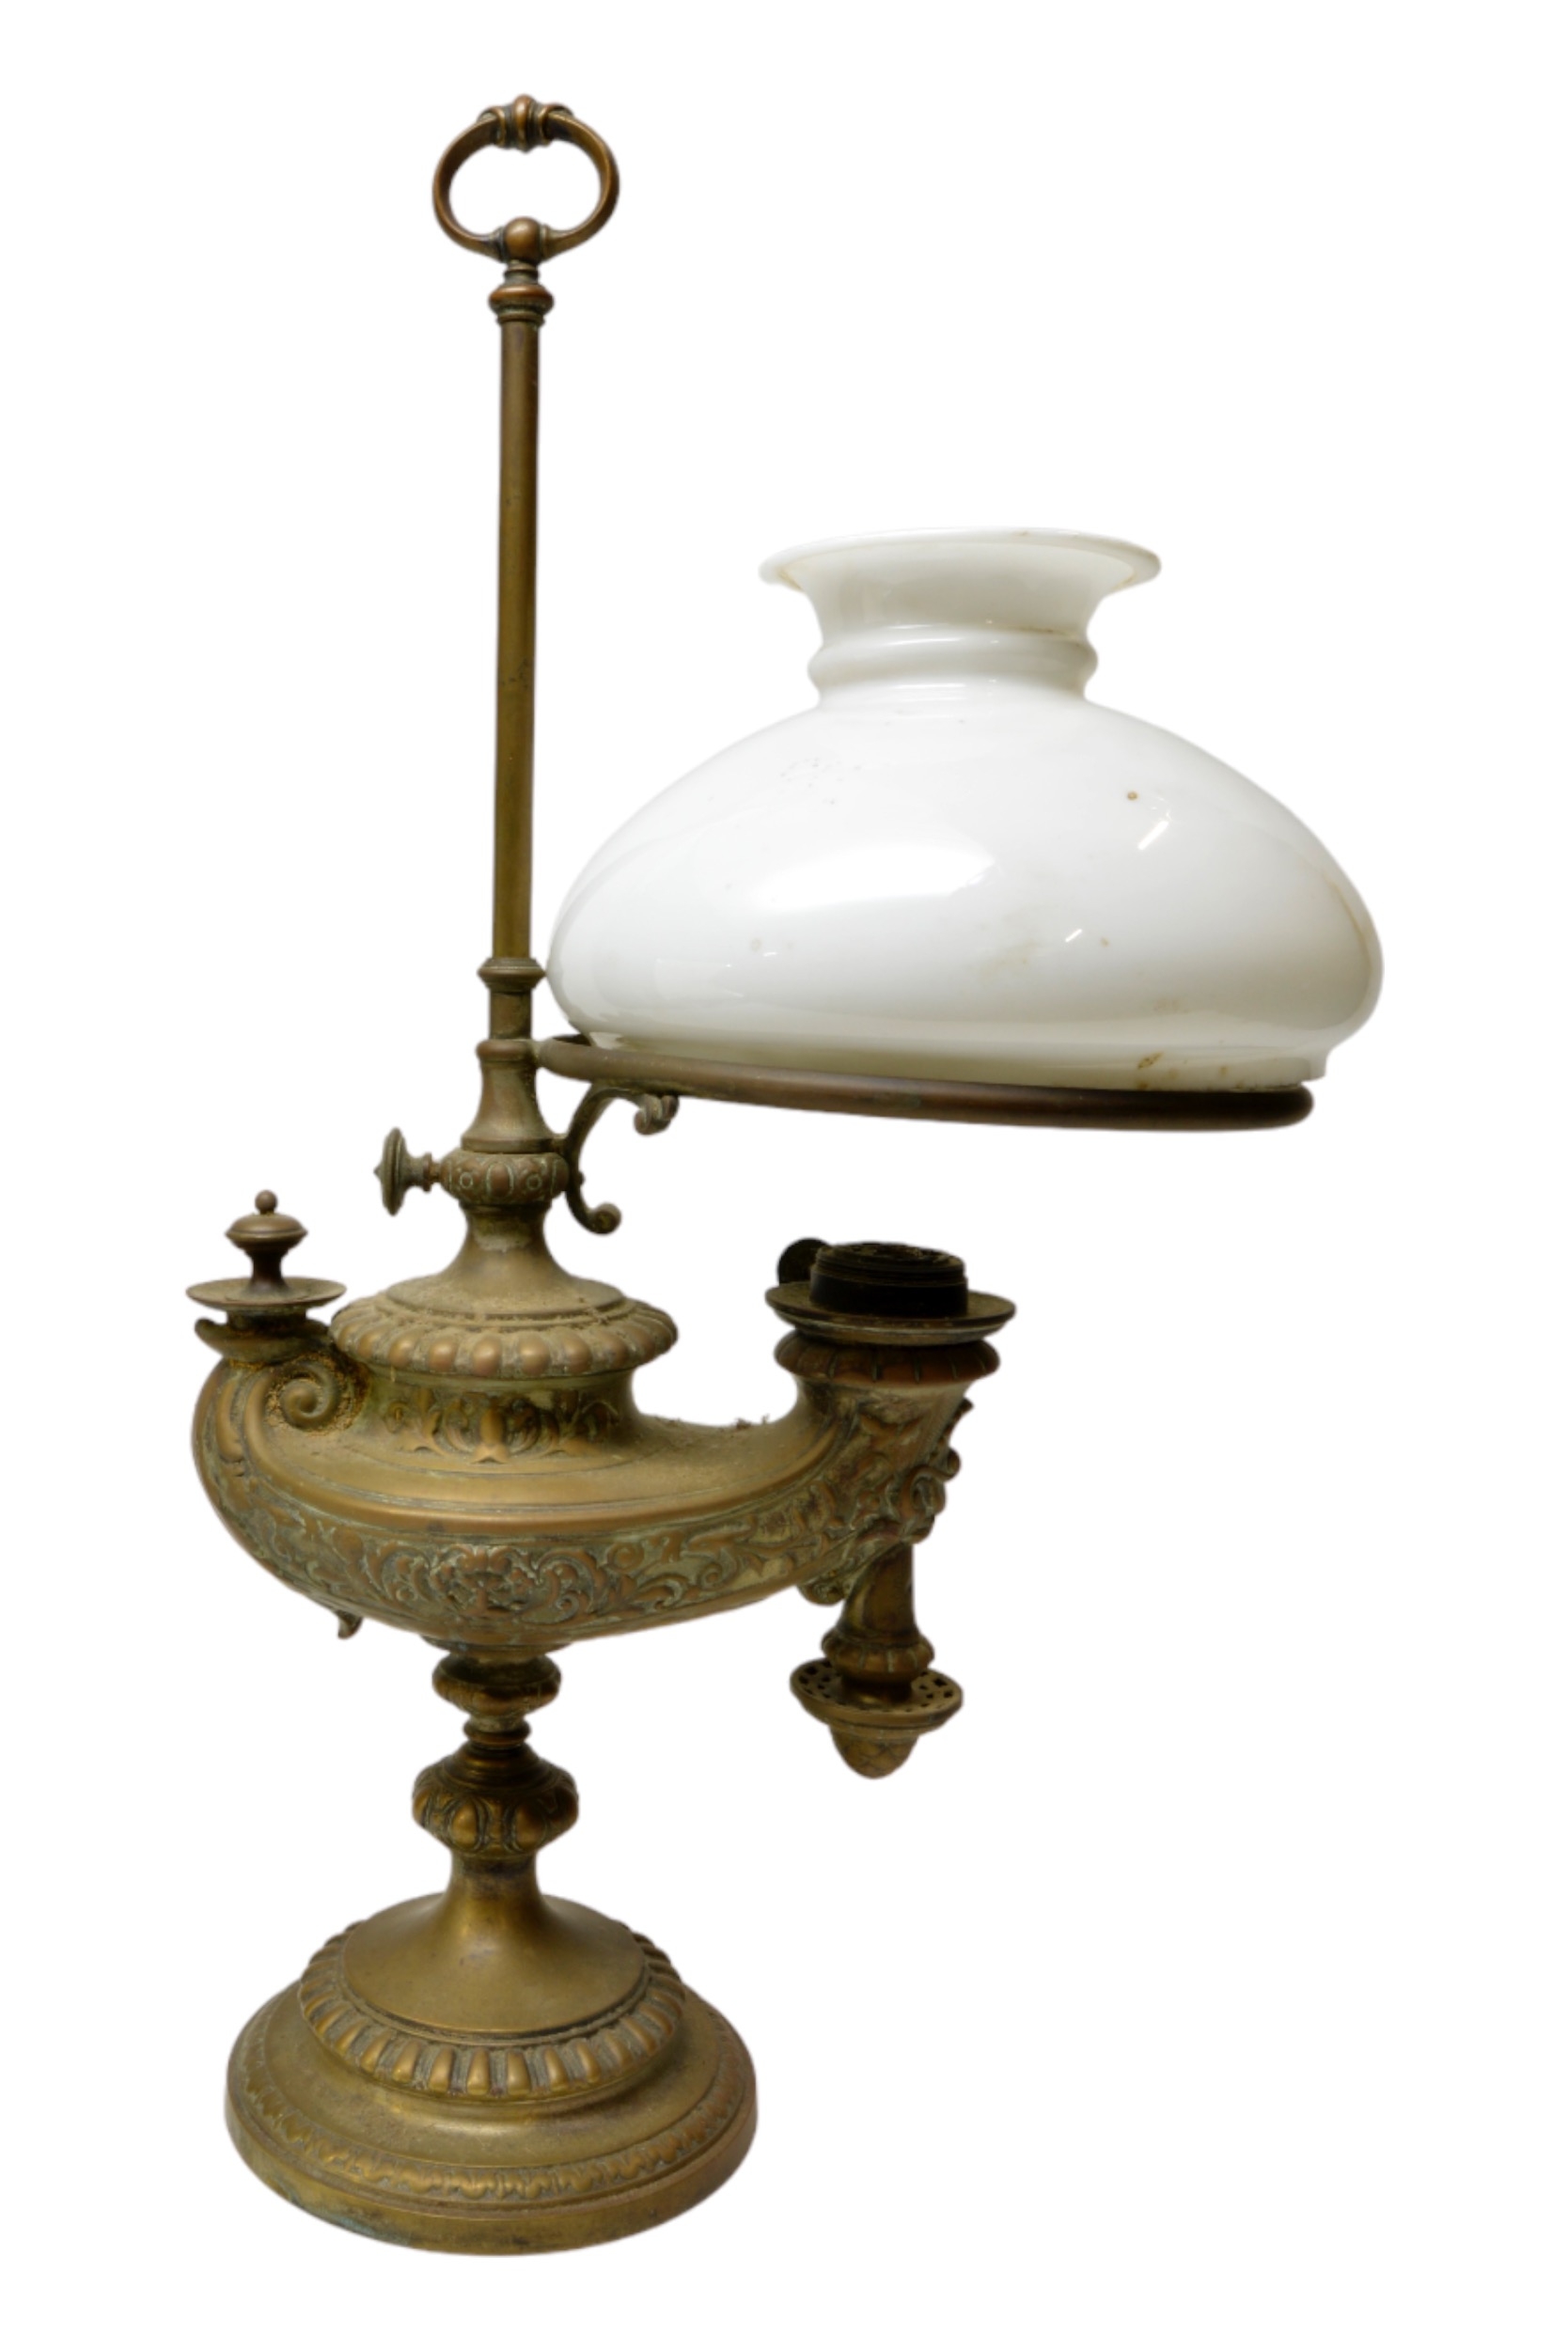 A WILD & WESSEL ORNATE BRASS 'VESTA' ADJUSTABLE OIL LAMP with associated glass shade. 54.5 cms